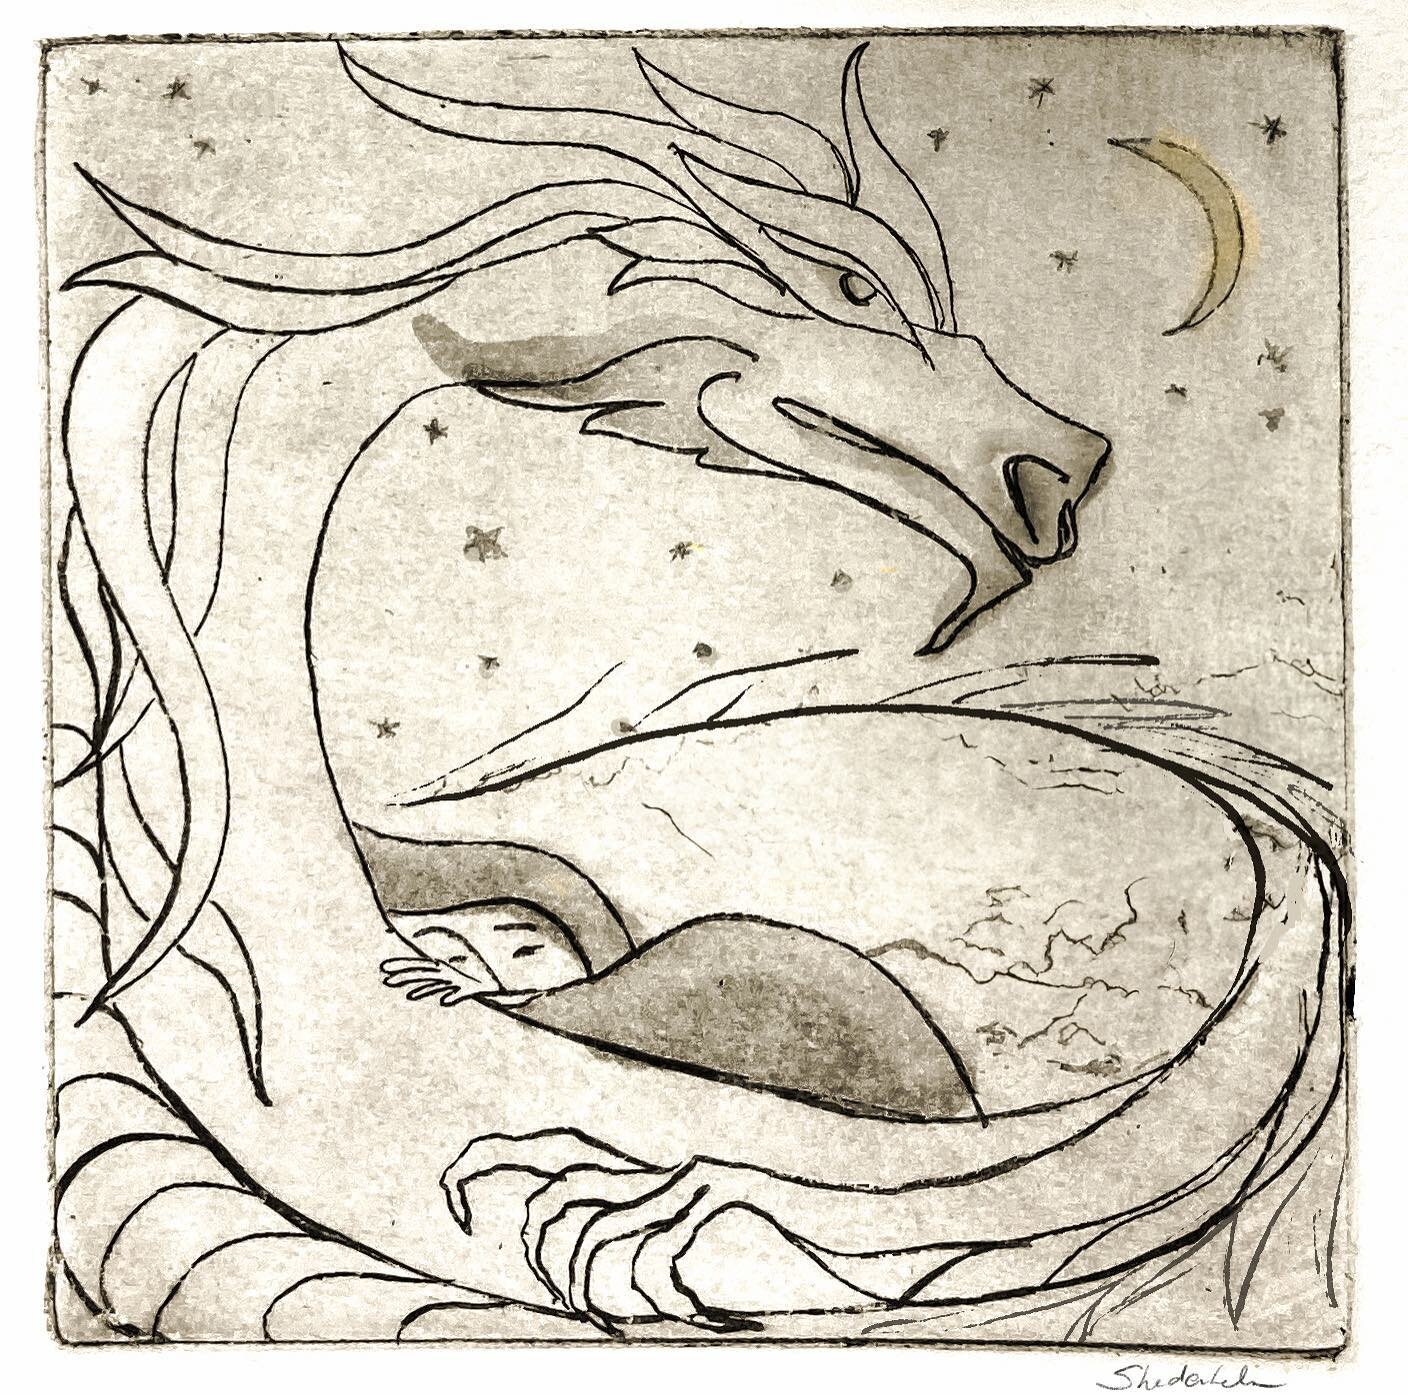 A drypoint etching for #folktaleweek2023 prompt, &ldquo;Sleep.&rdquo;
4 in x 4 in

#drypointetching #etching #intaglioprintmaking #tinydrawings #tinyprint #dungeonsanddragons #dragonart #folktaleweeksleep #folktaleweek #shedenhelm #illustration